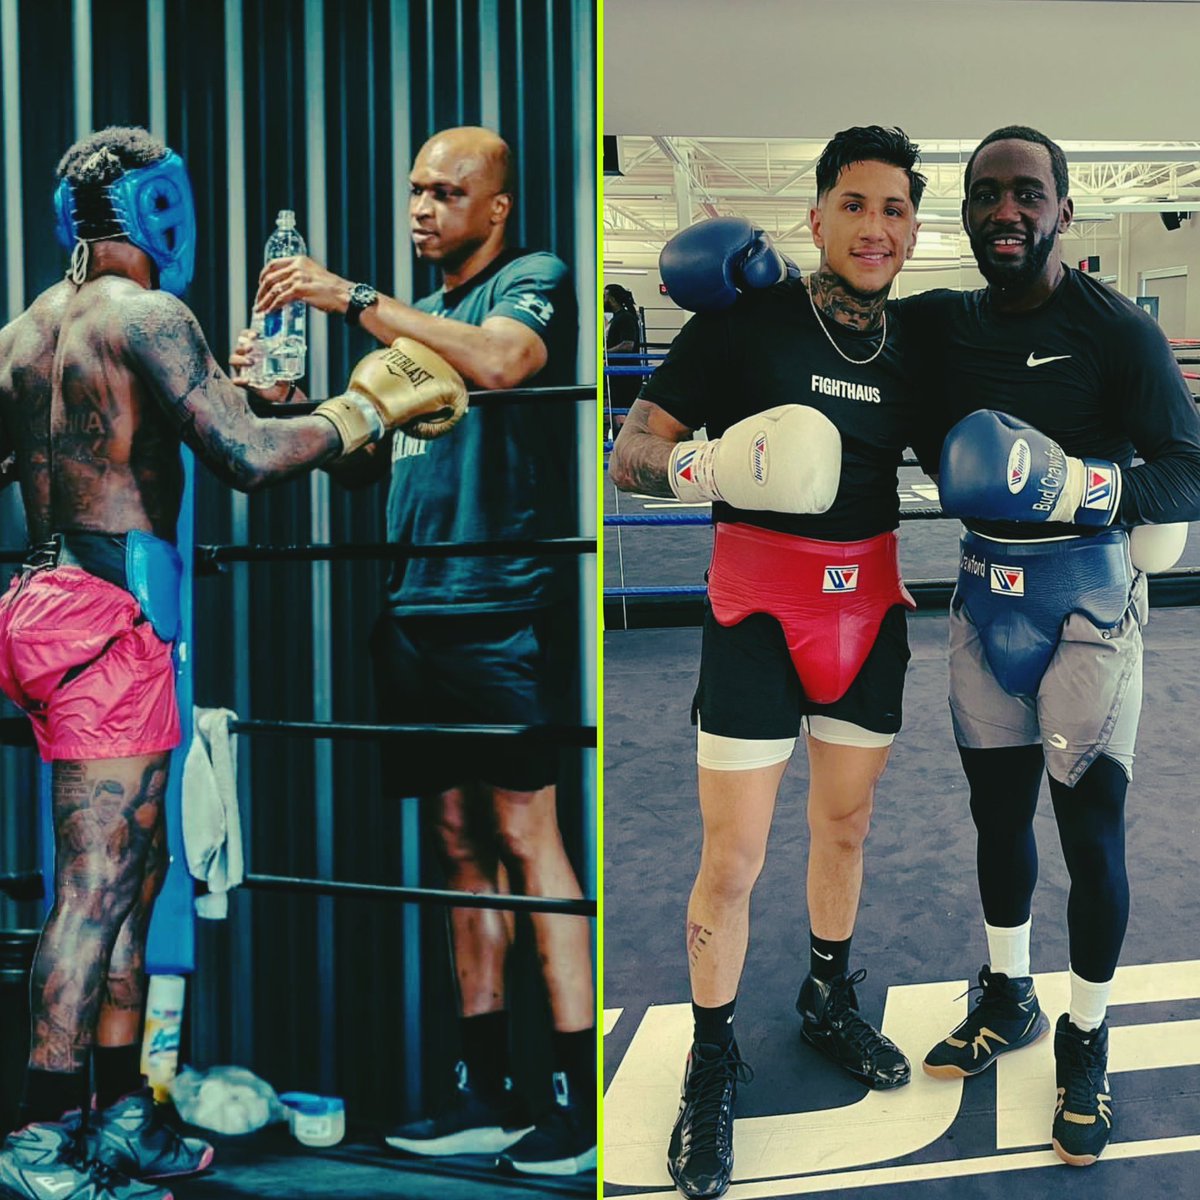 Spence and Crawford in camp. Mad how there’s been no press conference as of yet!! This fight sells itself to boxing fans. But does it crossover? I don’t believe it does and you can’t expect it to if you don’t promote it. But that’s on the promoters.I just want to see this fight!